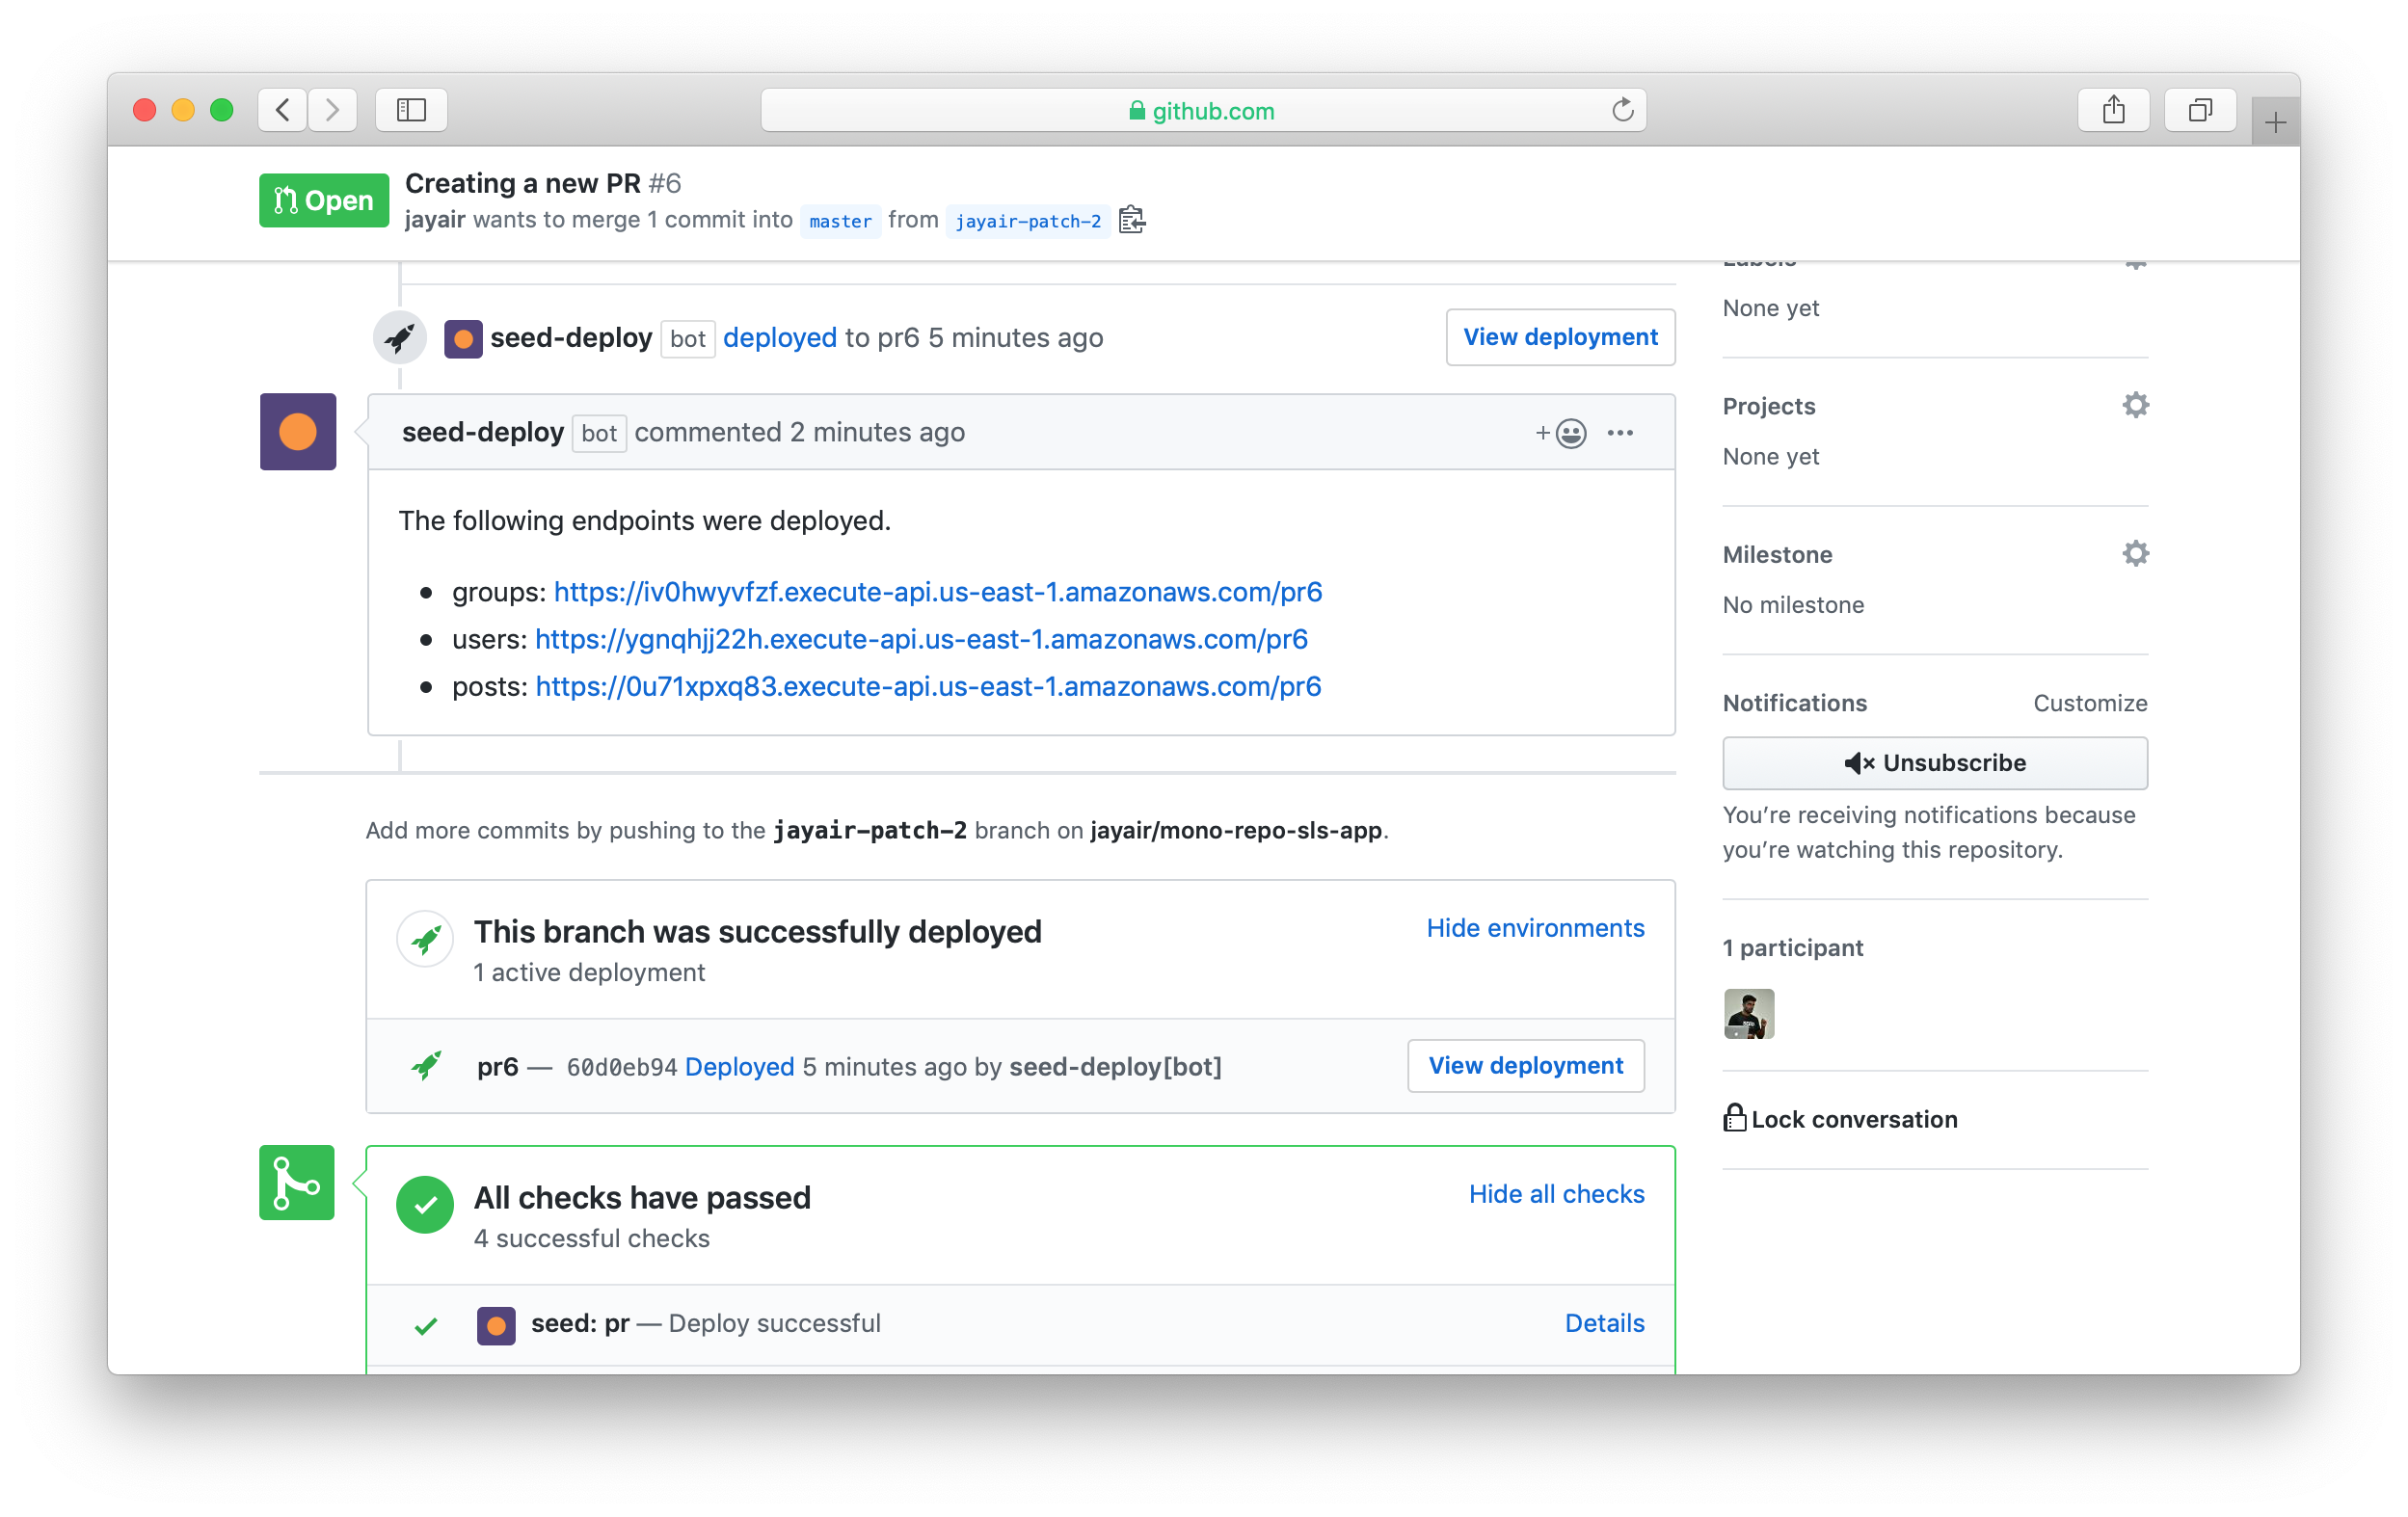 Seed PR complete info in GitHub